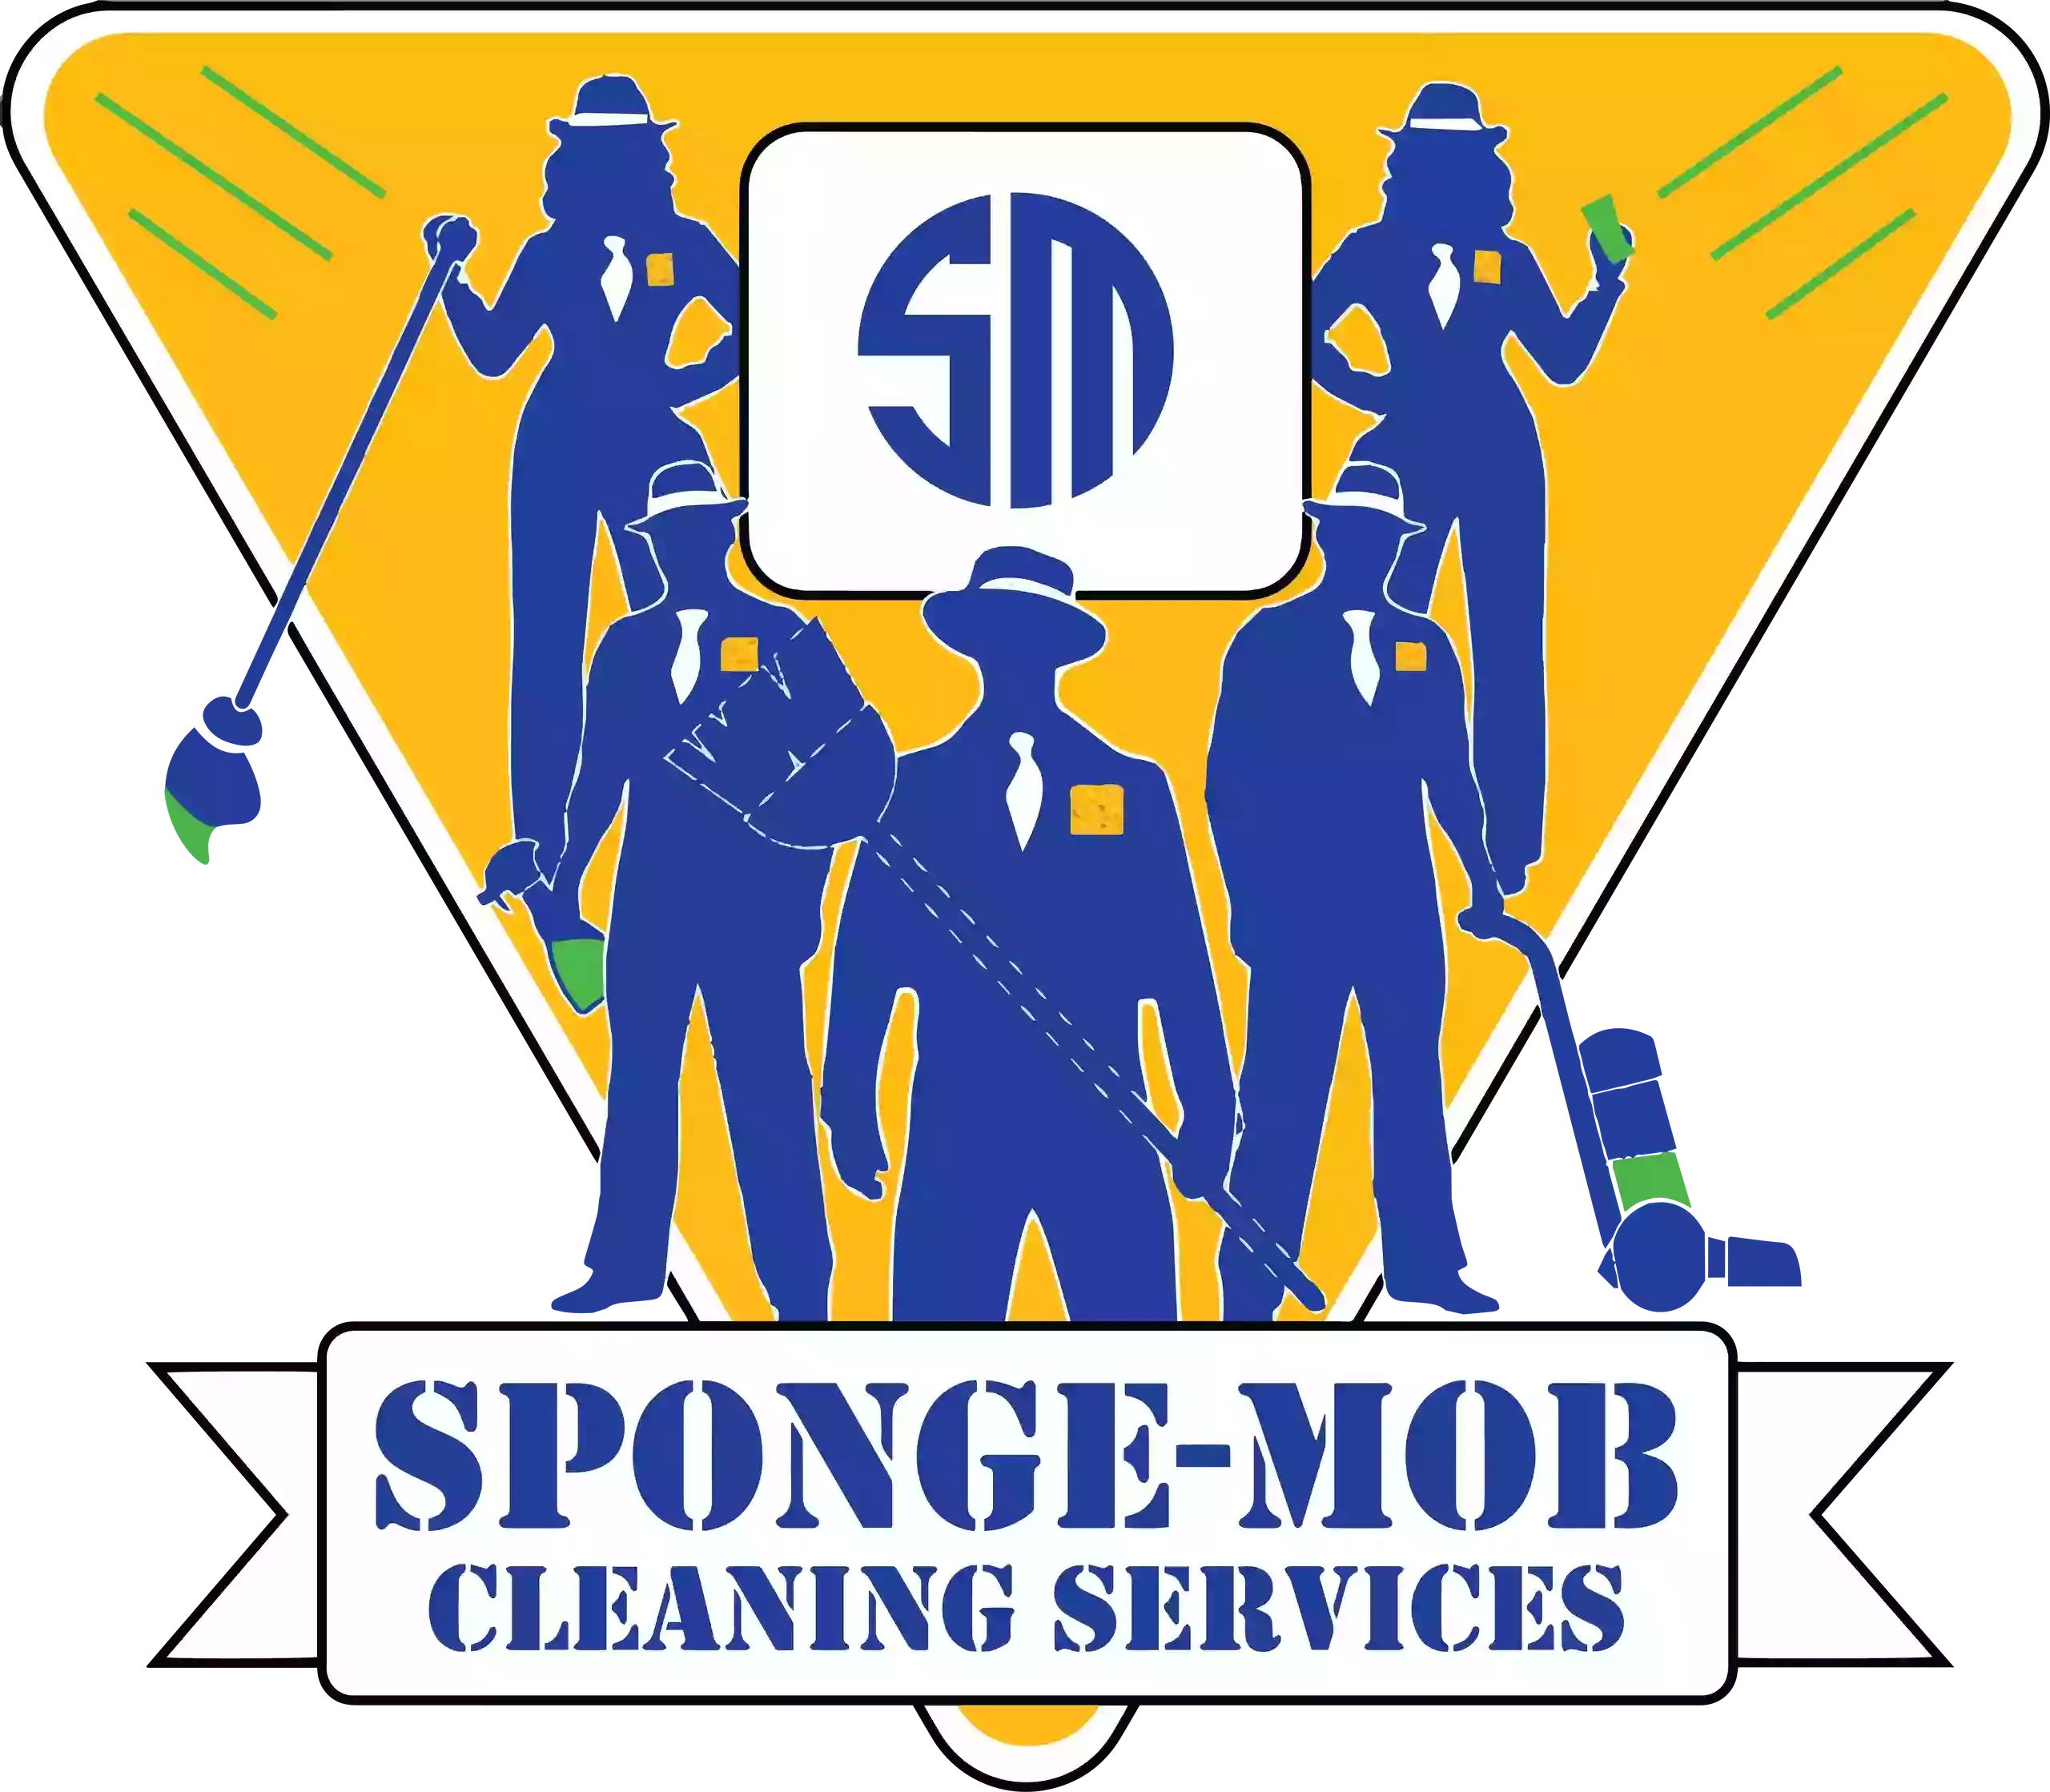 Sponge-Mob Cleaning Services Central